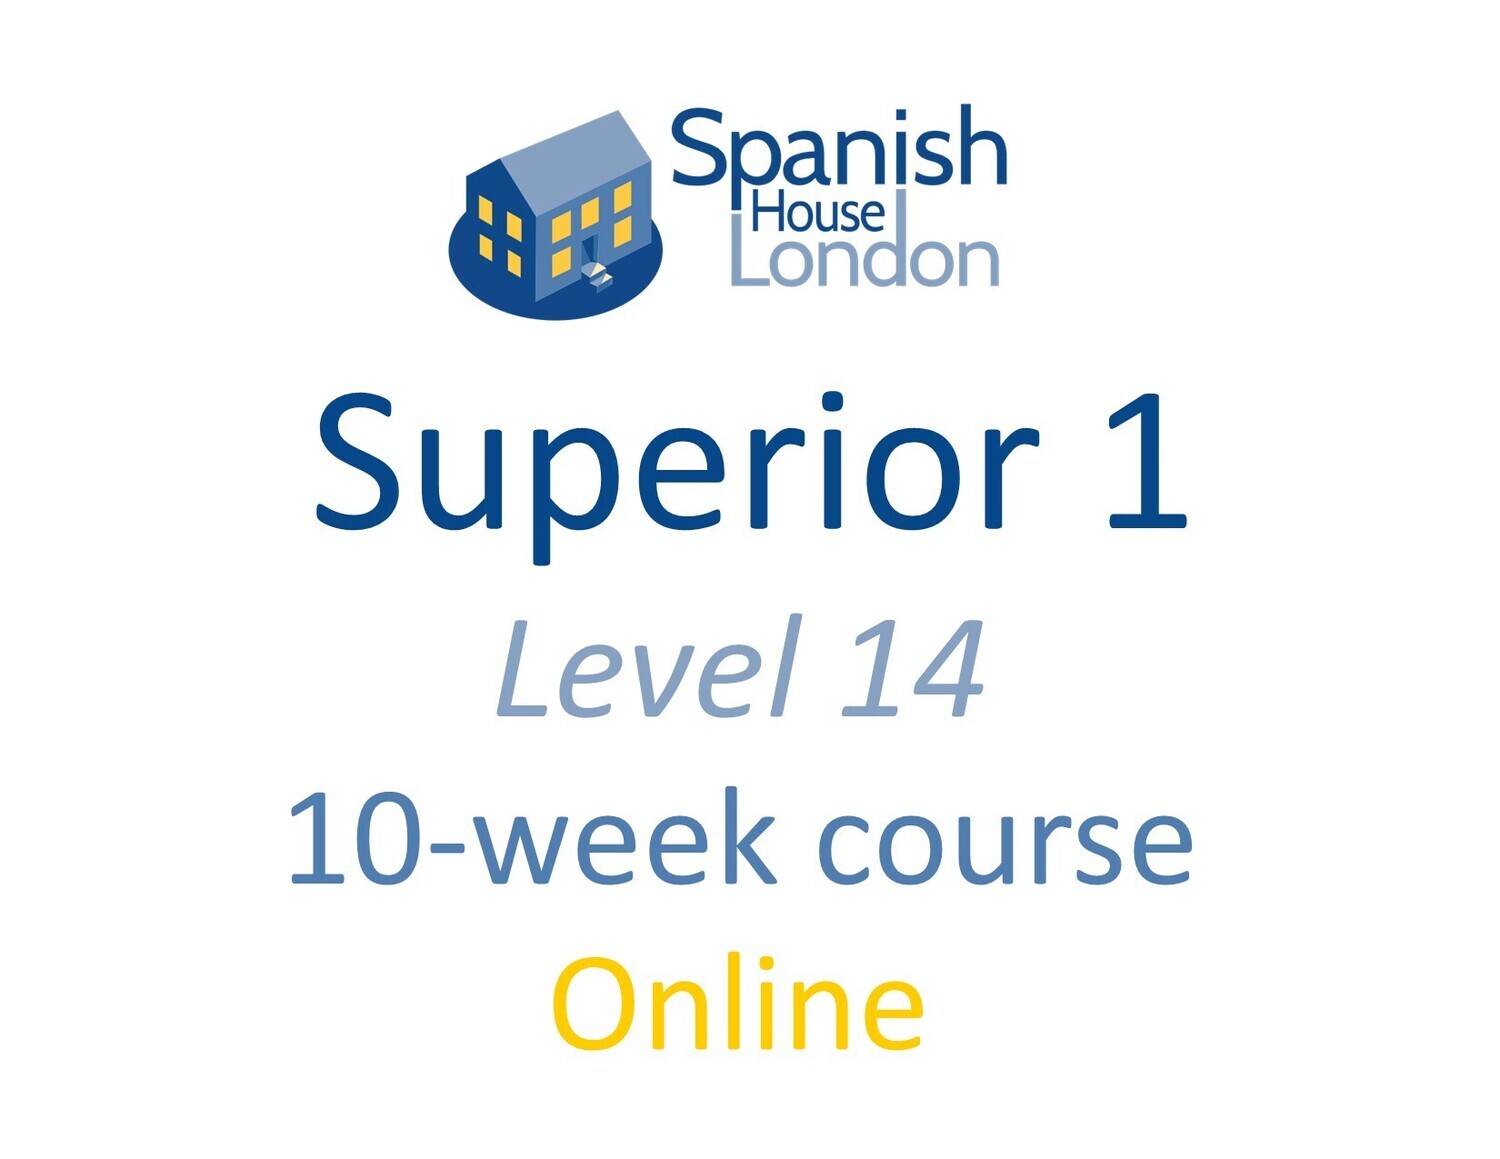 Superior 1 Course starting on 31st May at 7.30pm Online